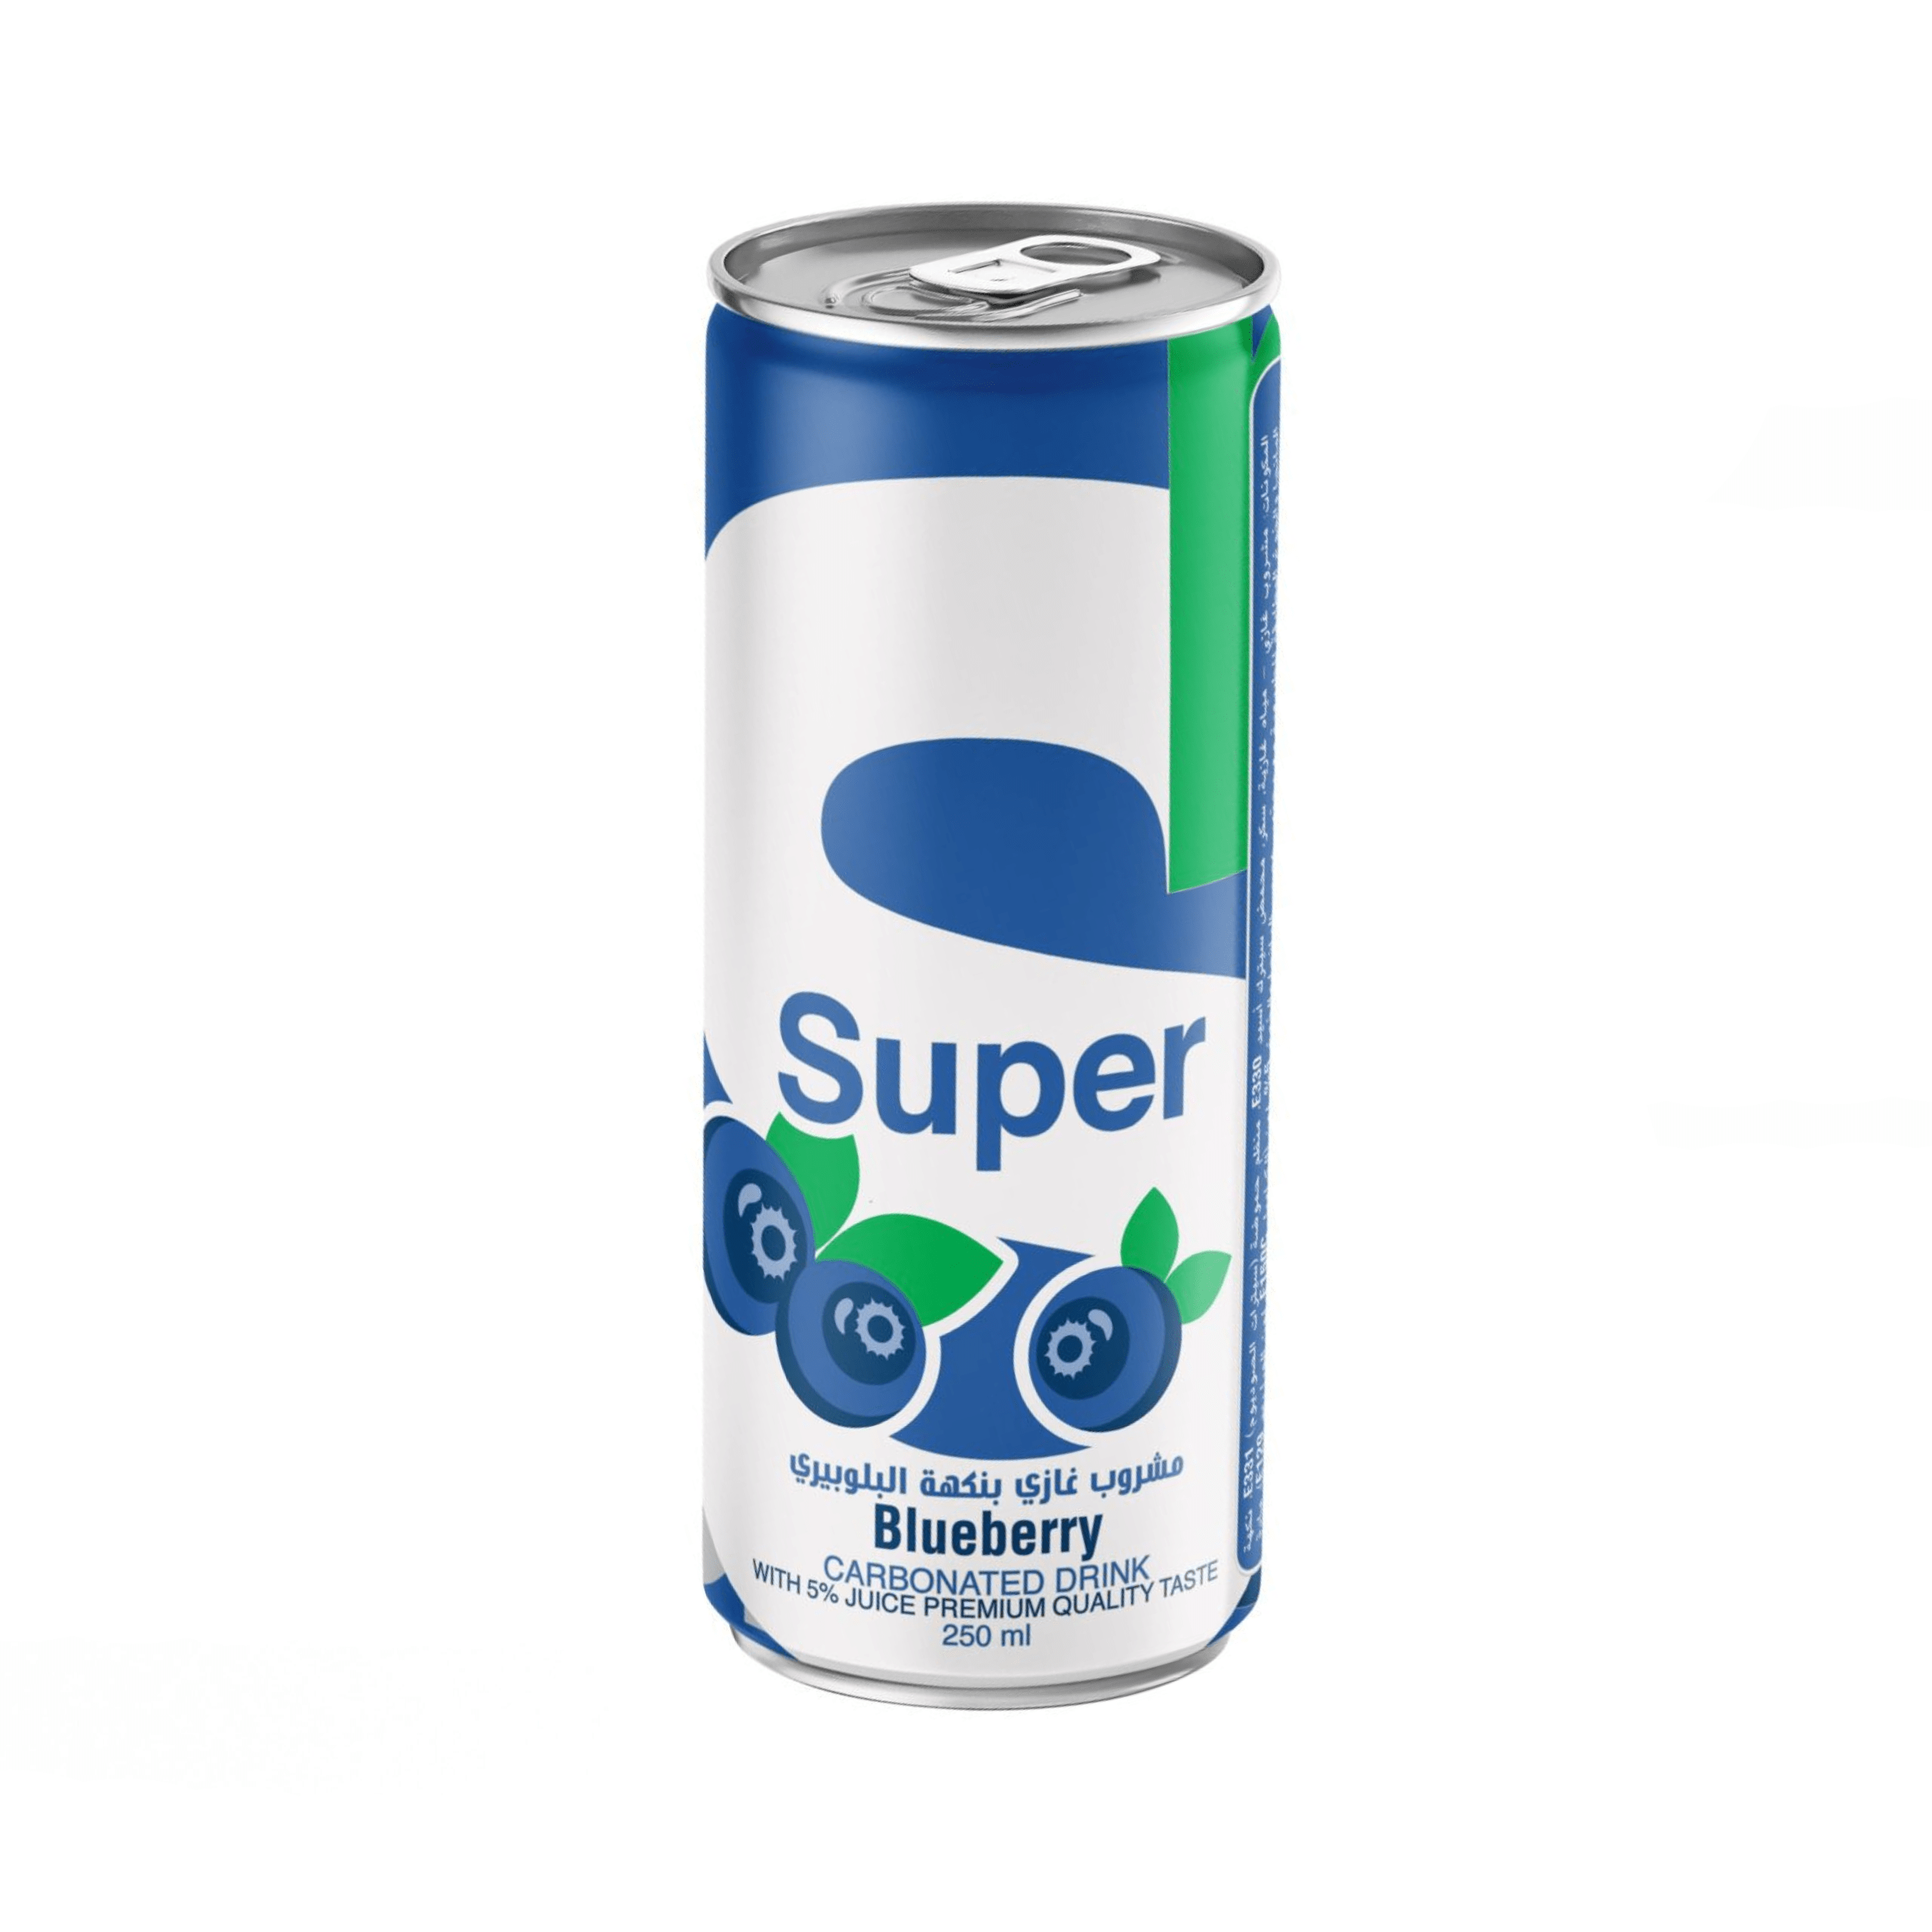 Super Blueberry Carbonated Drink 250 ml